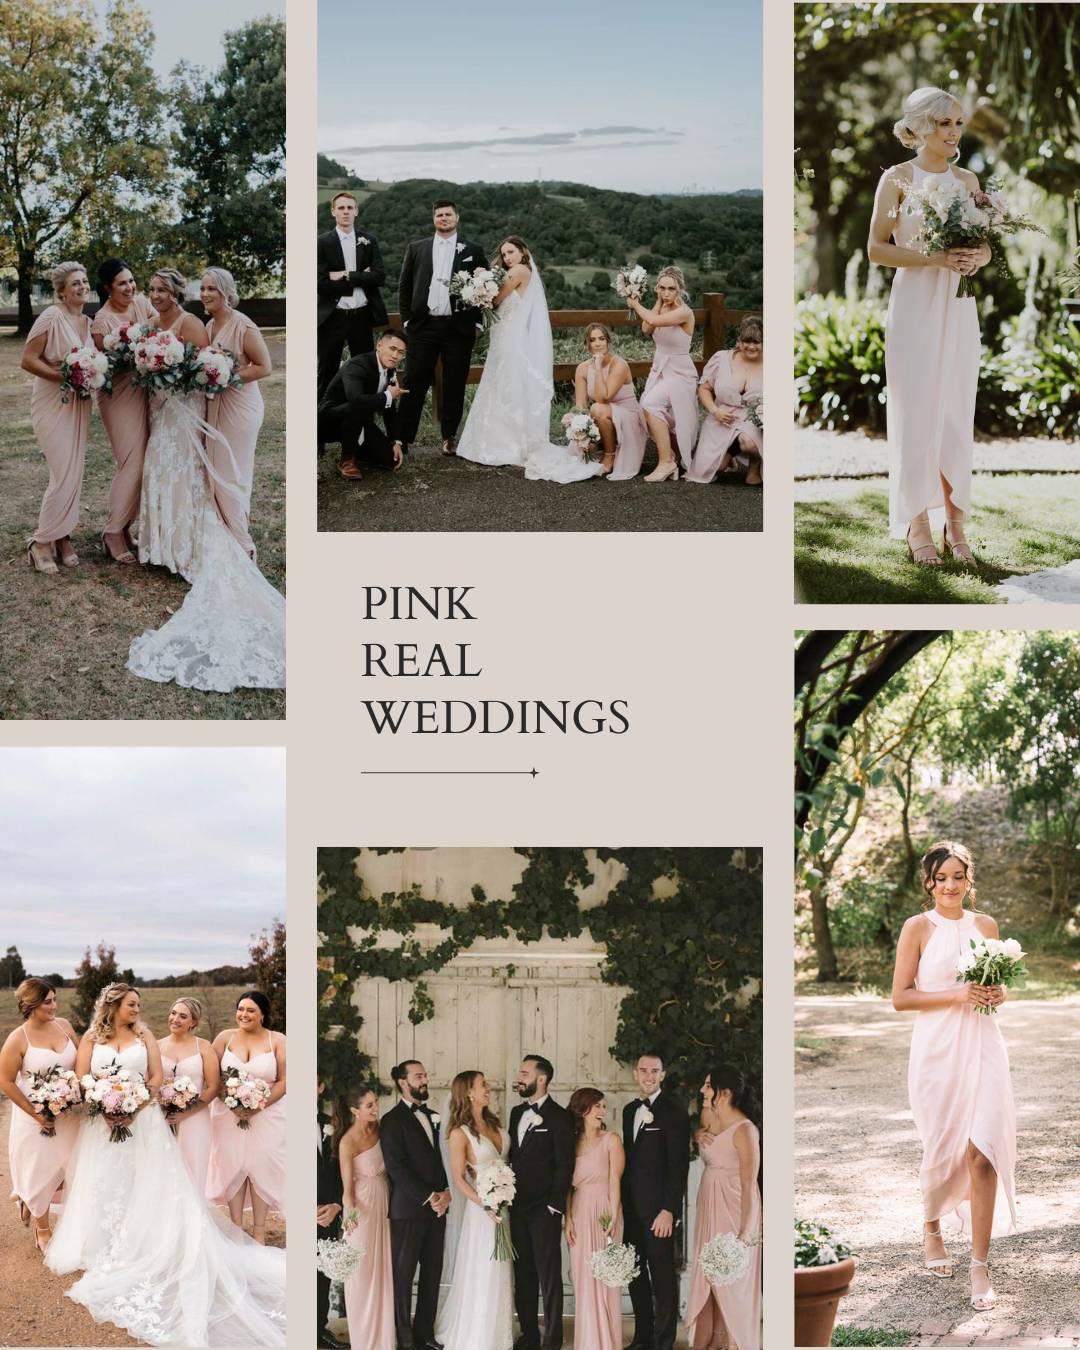 real wedding inspiration for pink bridesmaid dresses in Australia